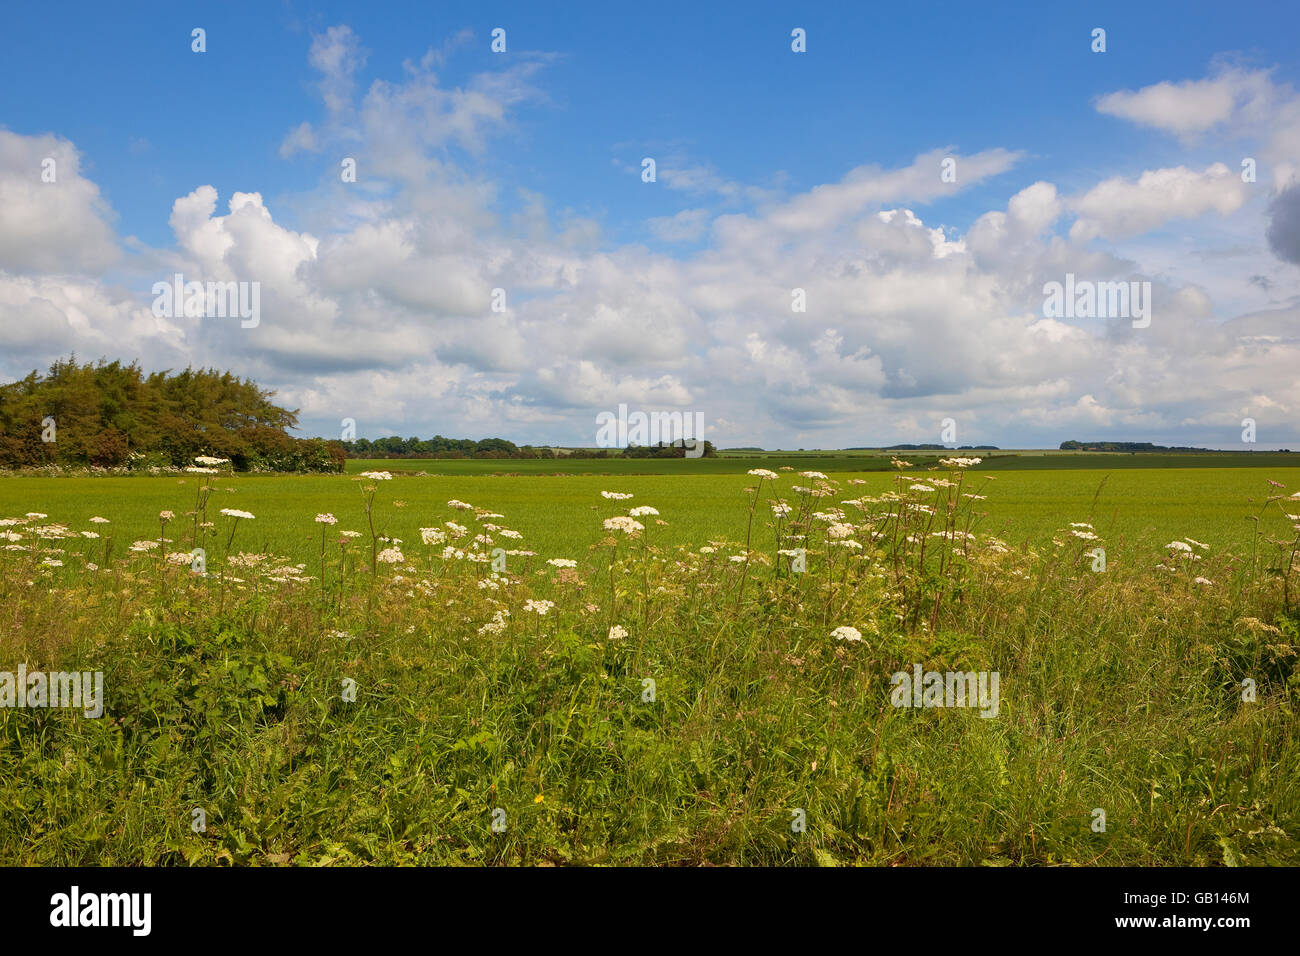 Field side wildflowers growing in the scenic agricultural landscape of the Yorkshire wolds in summertime. Stock Photo